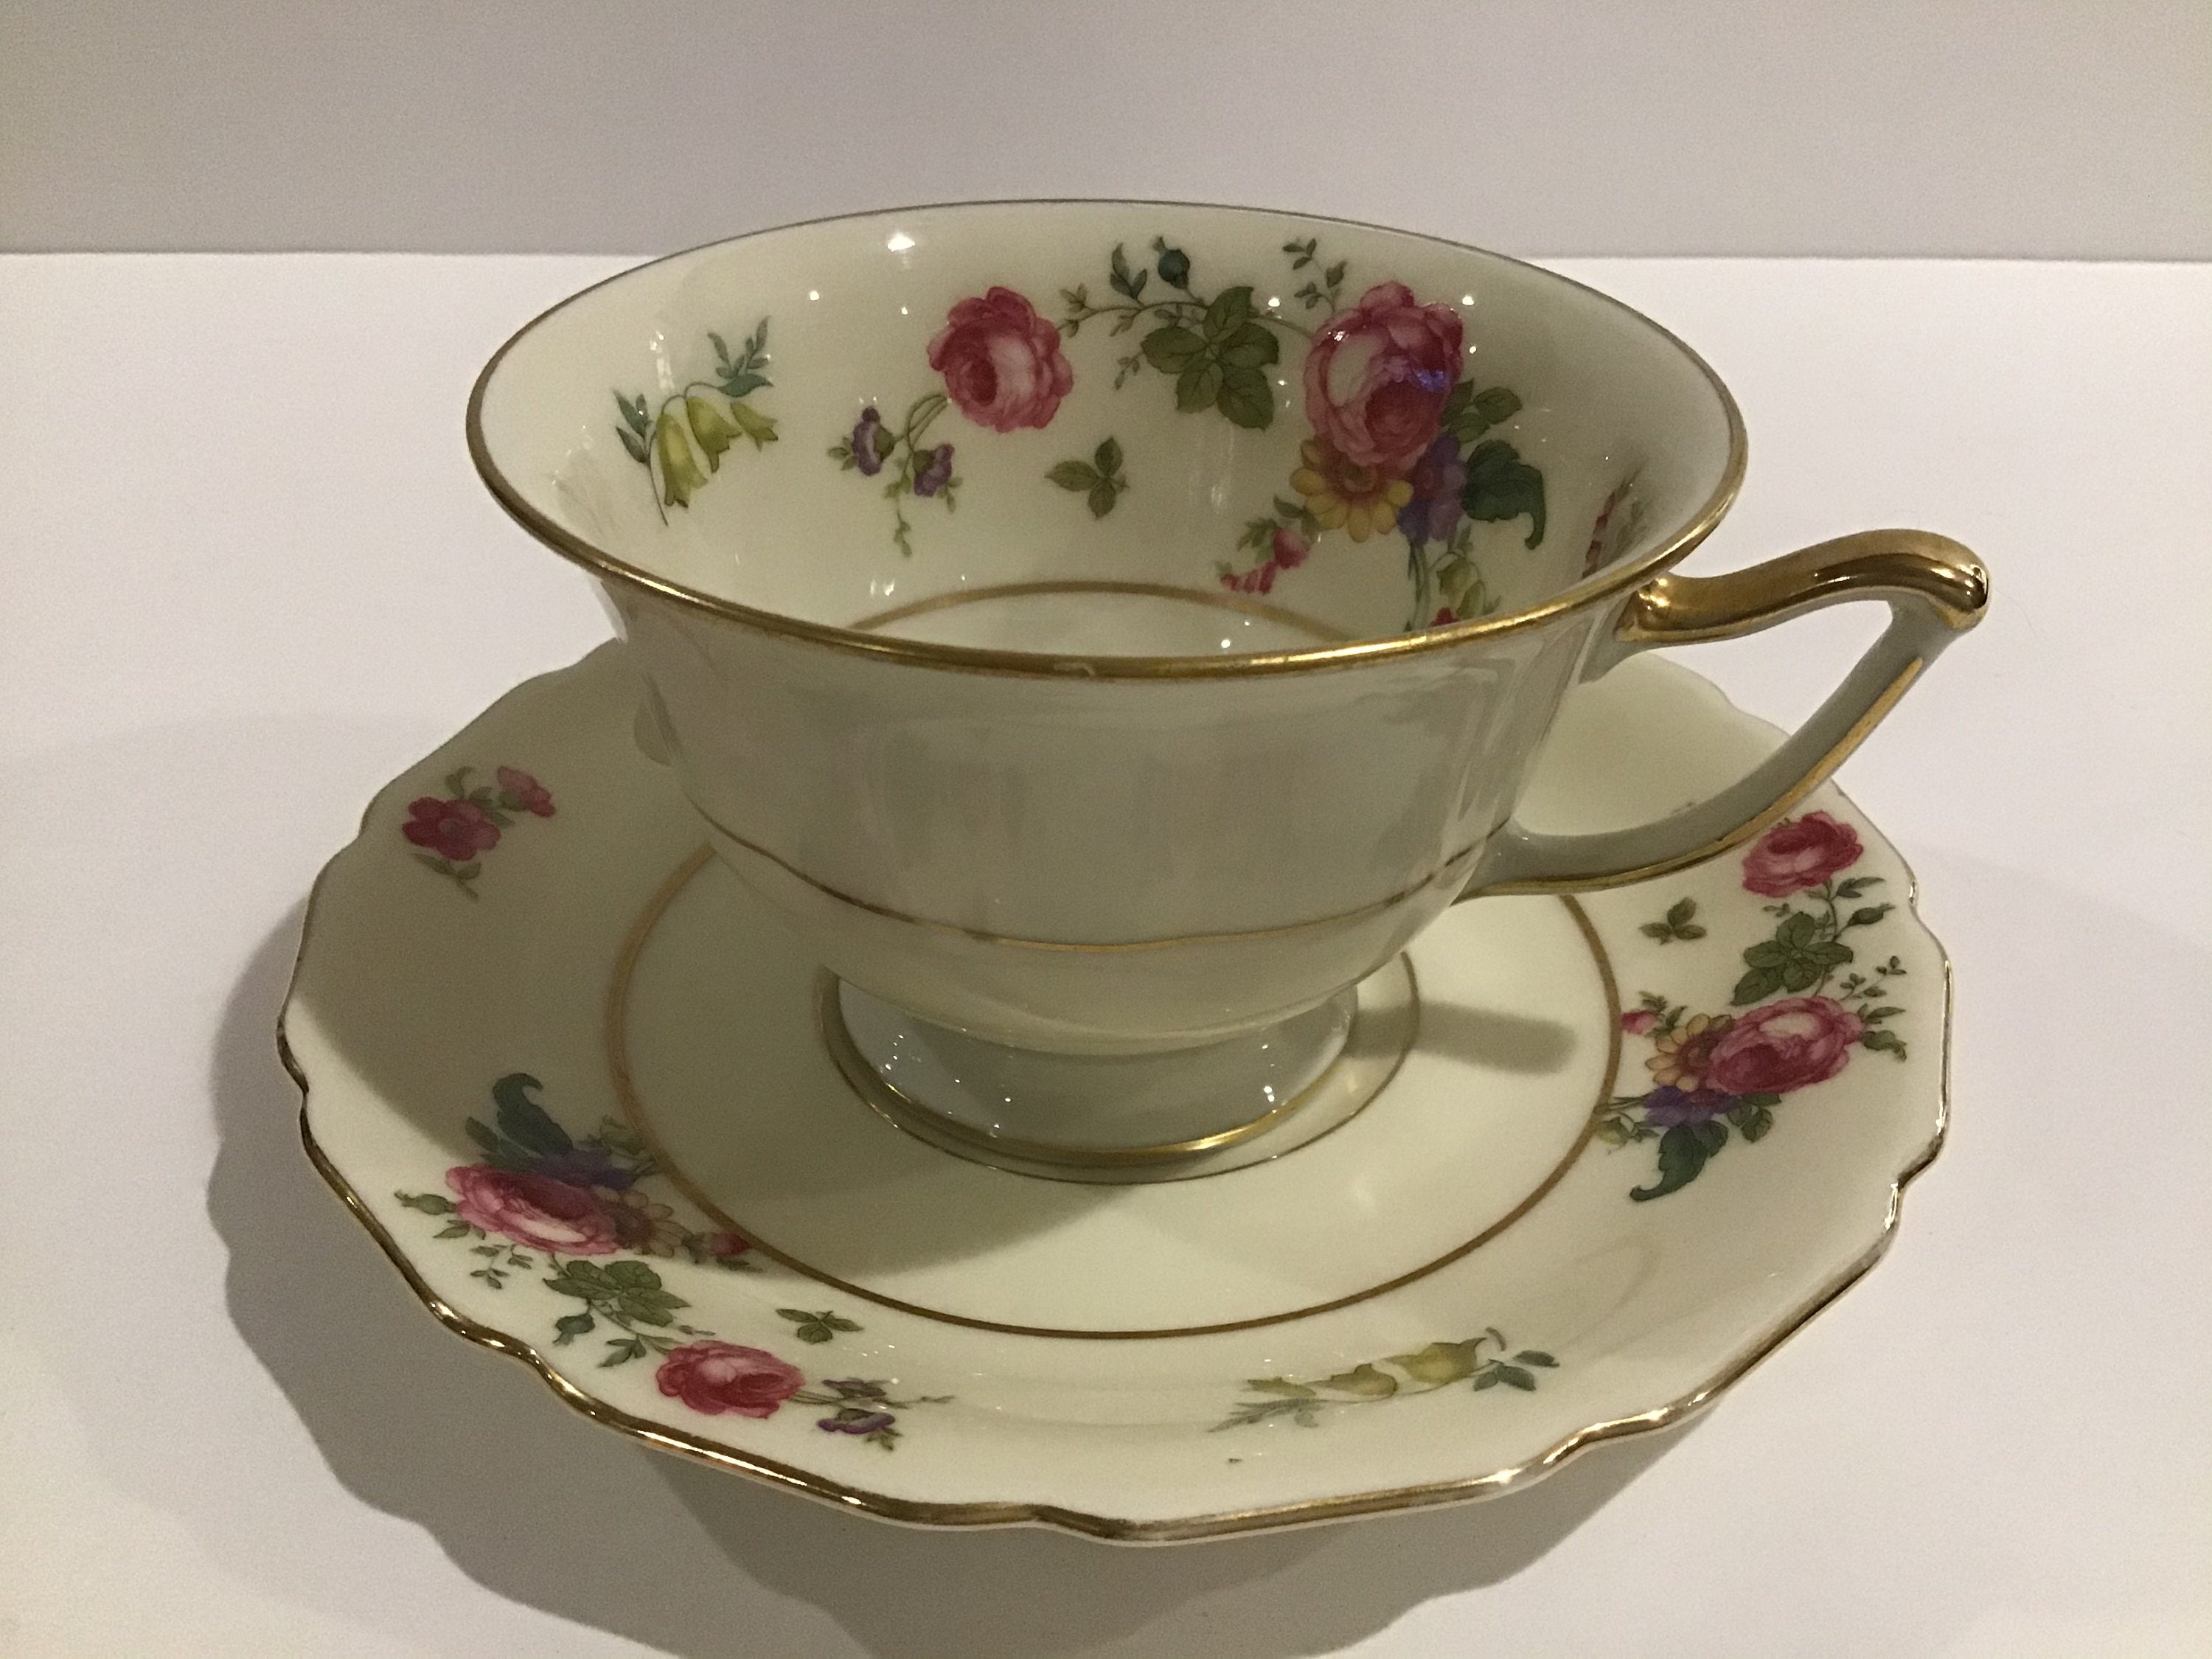 BNIB SOUP CUP SAUCER only 17.5 CM THOMAS CHINA WIDE PLATINUM 798 